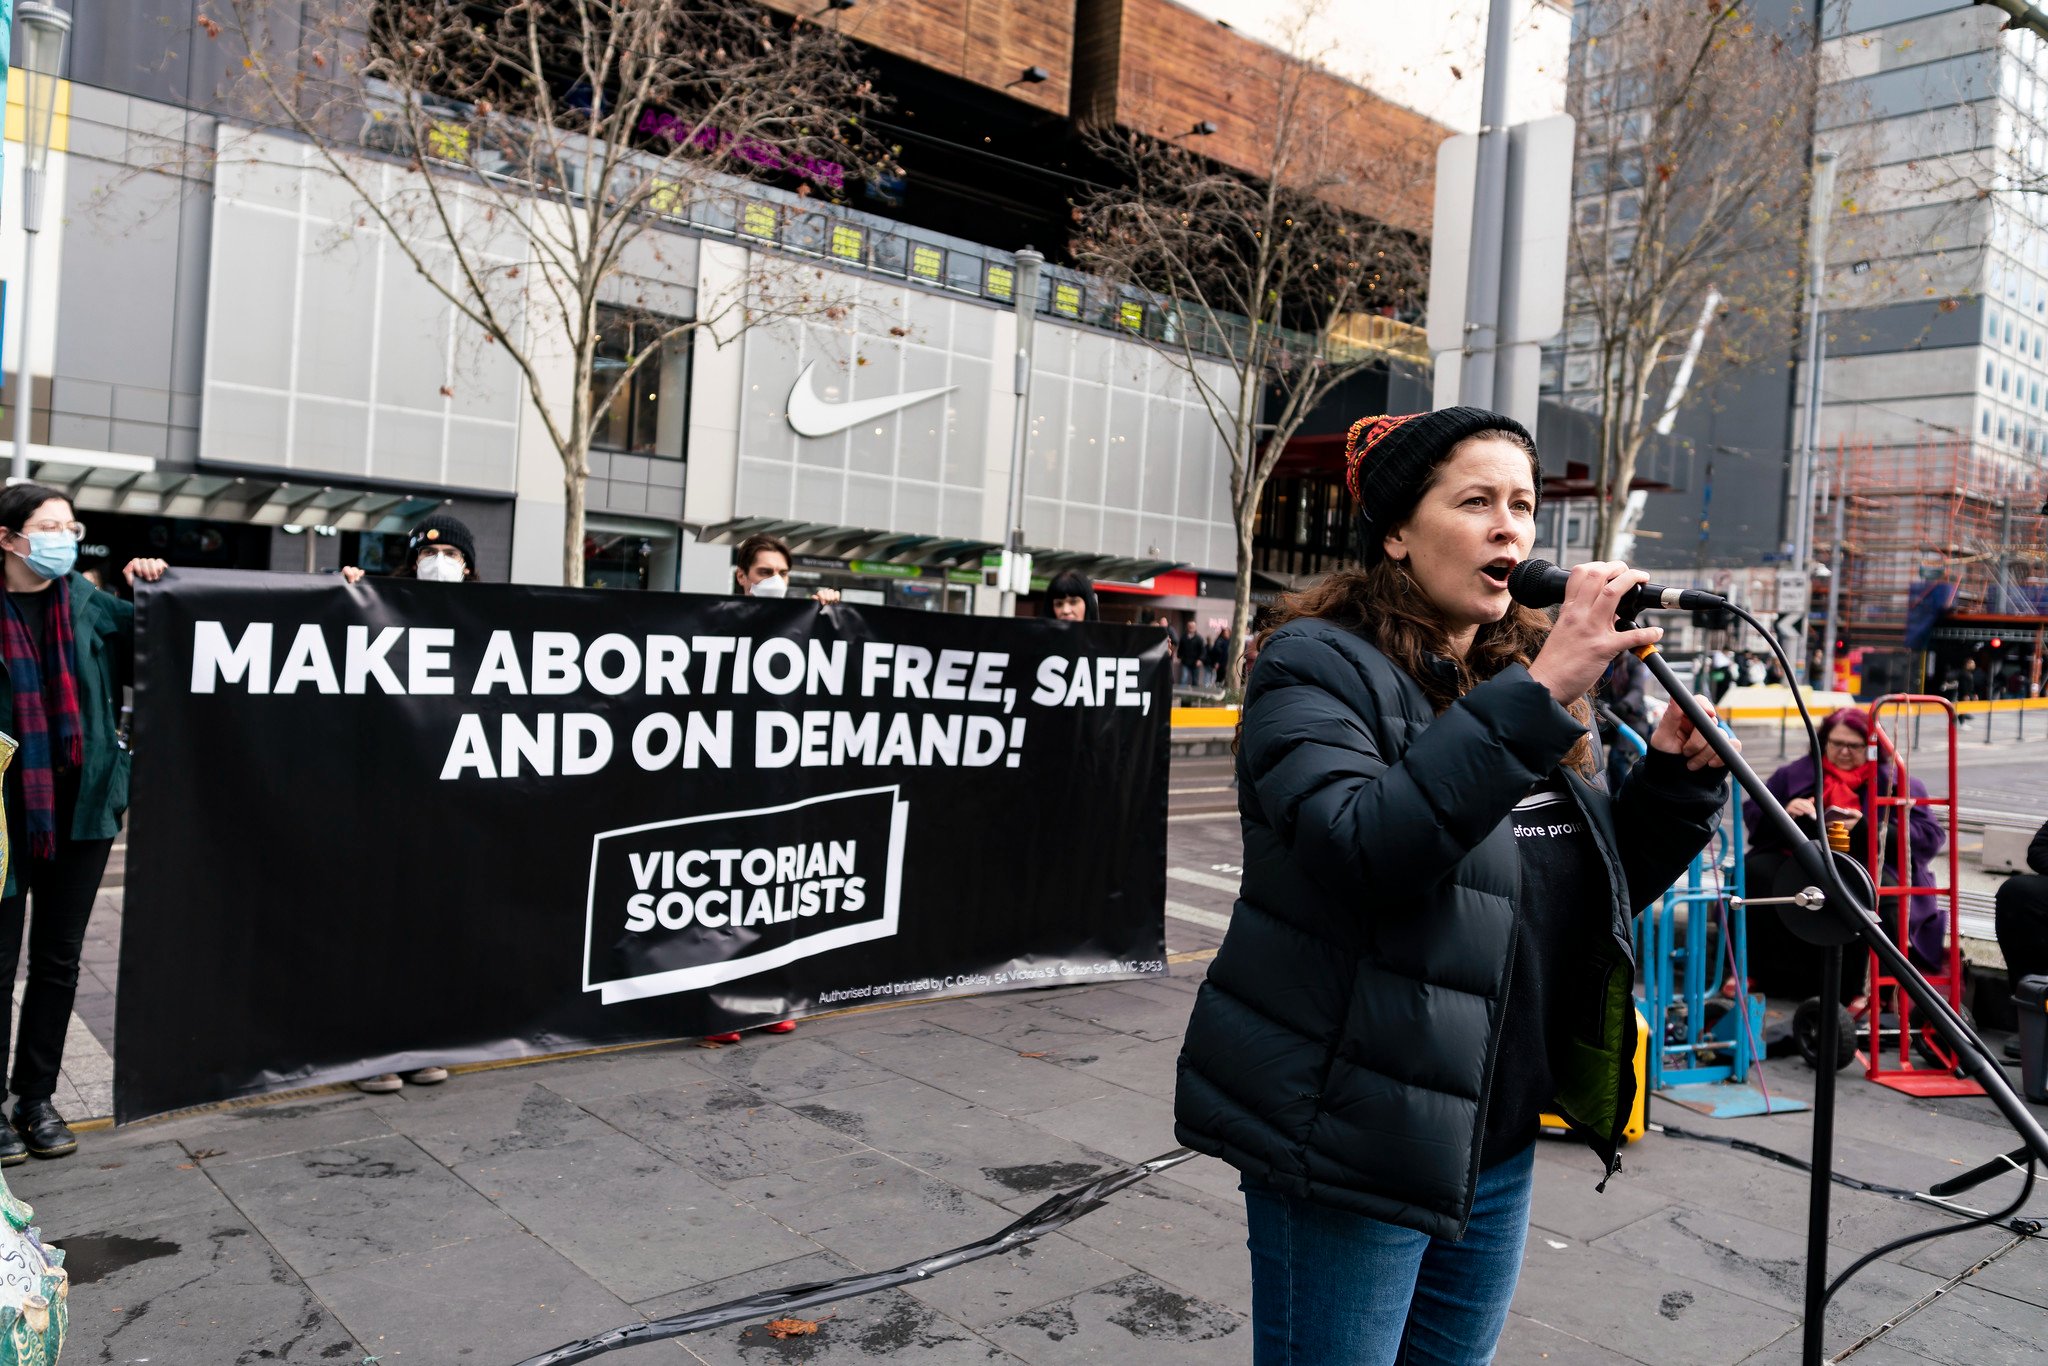 Liz Walsh speaks at rally in support of abortion rights